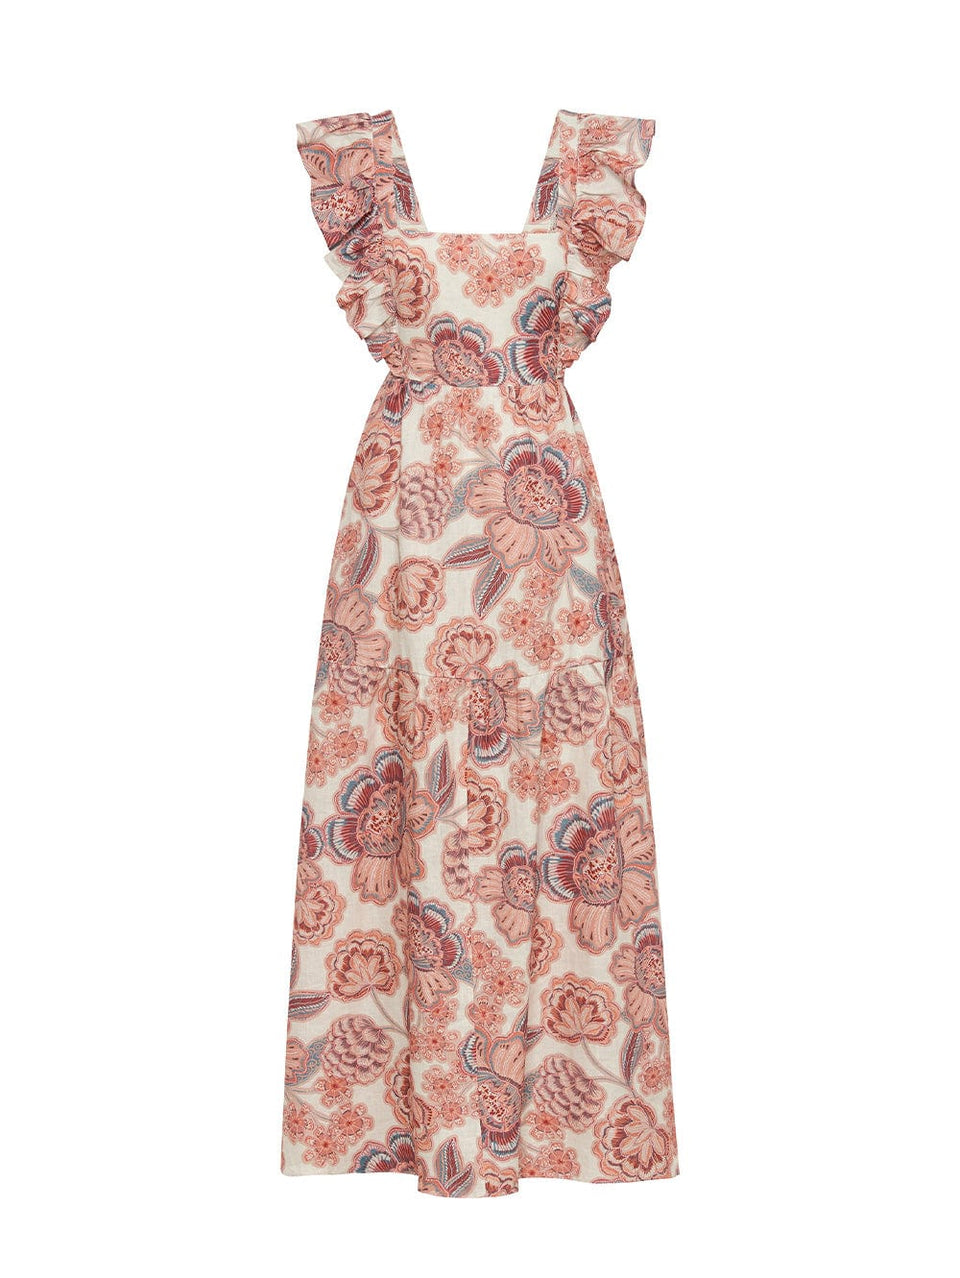 Ghost image of KIVARI Maya Maxi Dress: A pink and red floral on a natural base made from a linen-cotton blend and featuring square neckline, ruffle shoulder straps, tie back bodice and side pockets.